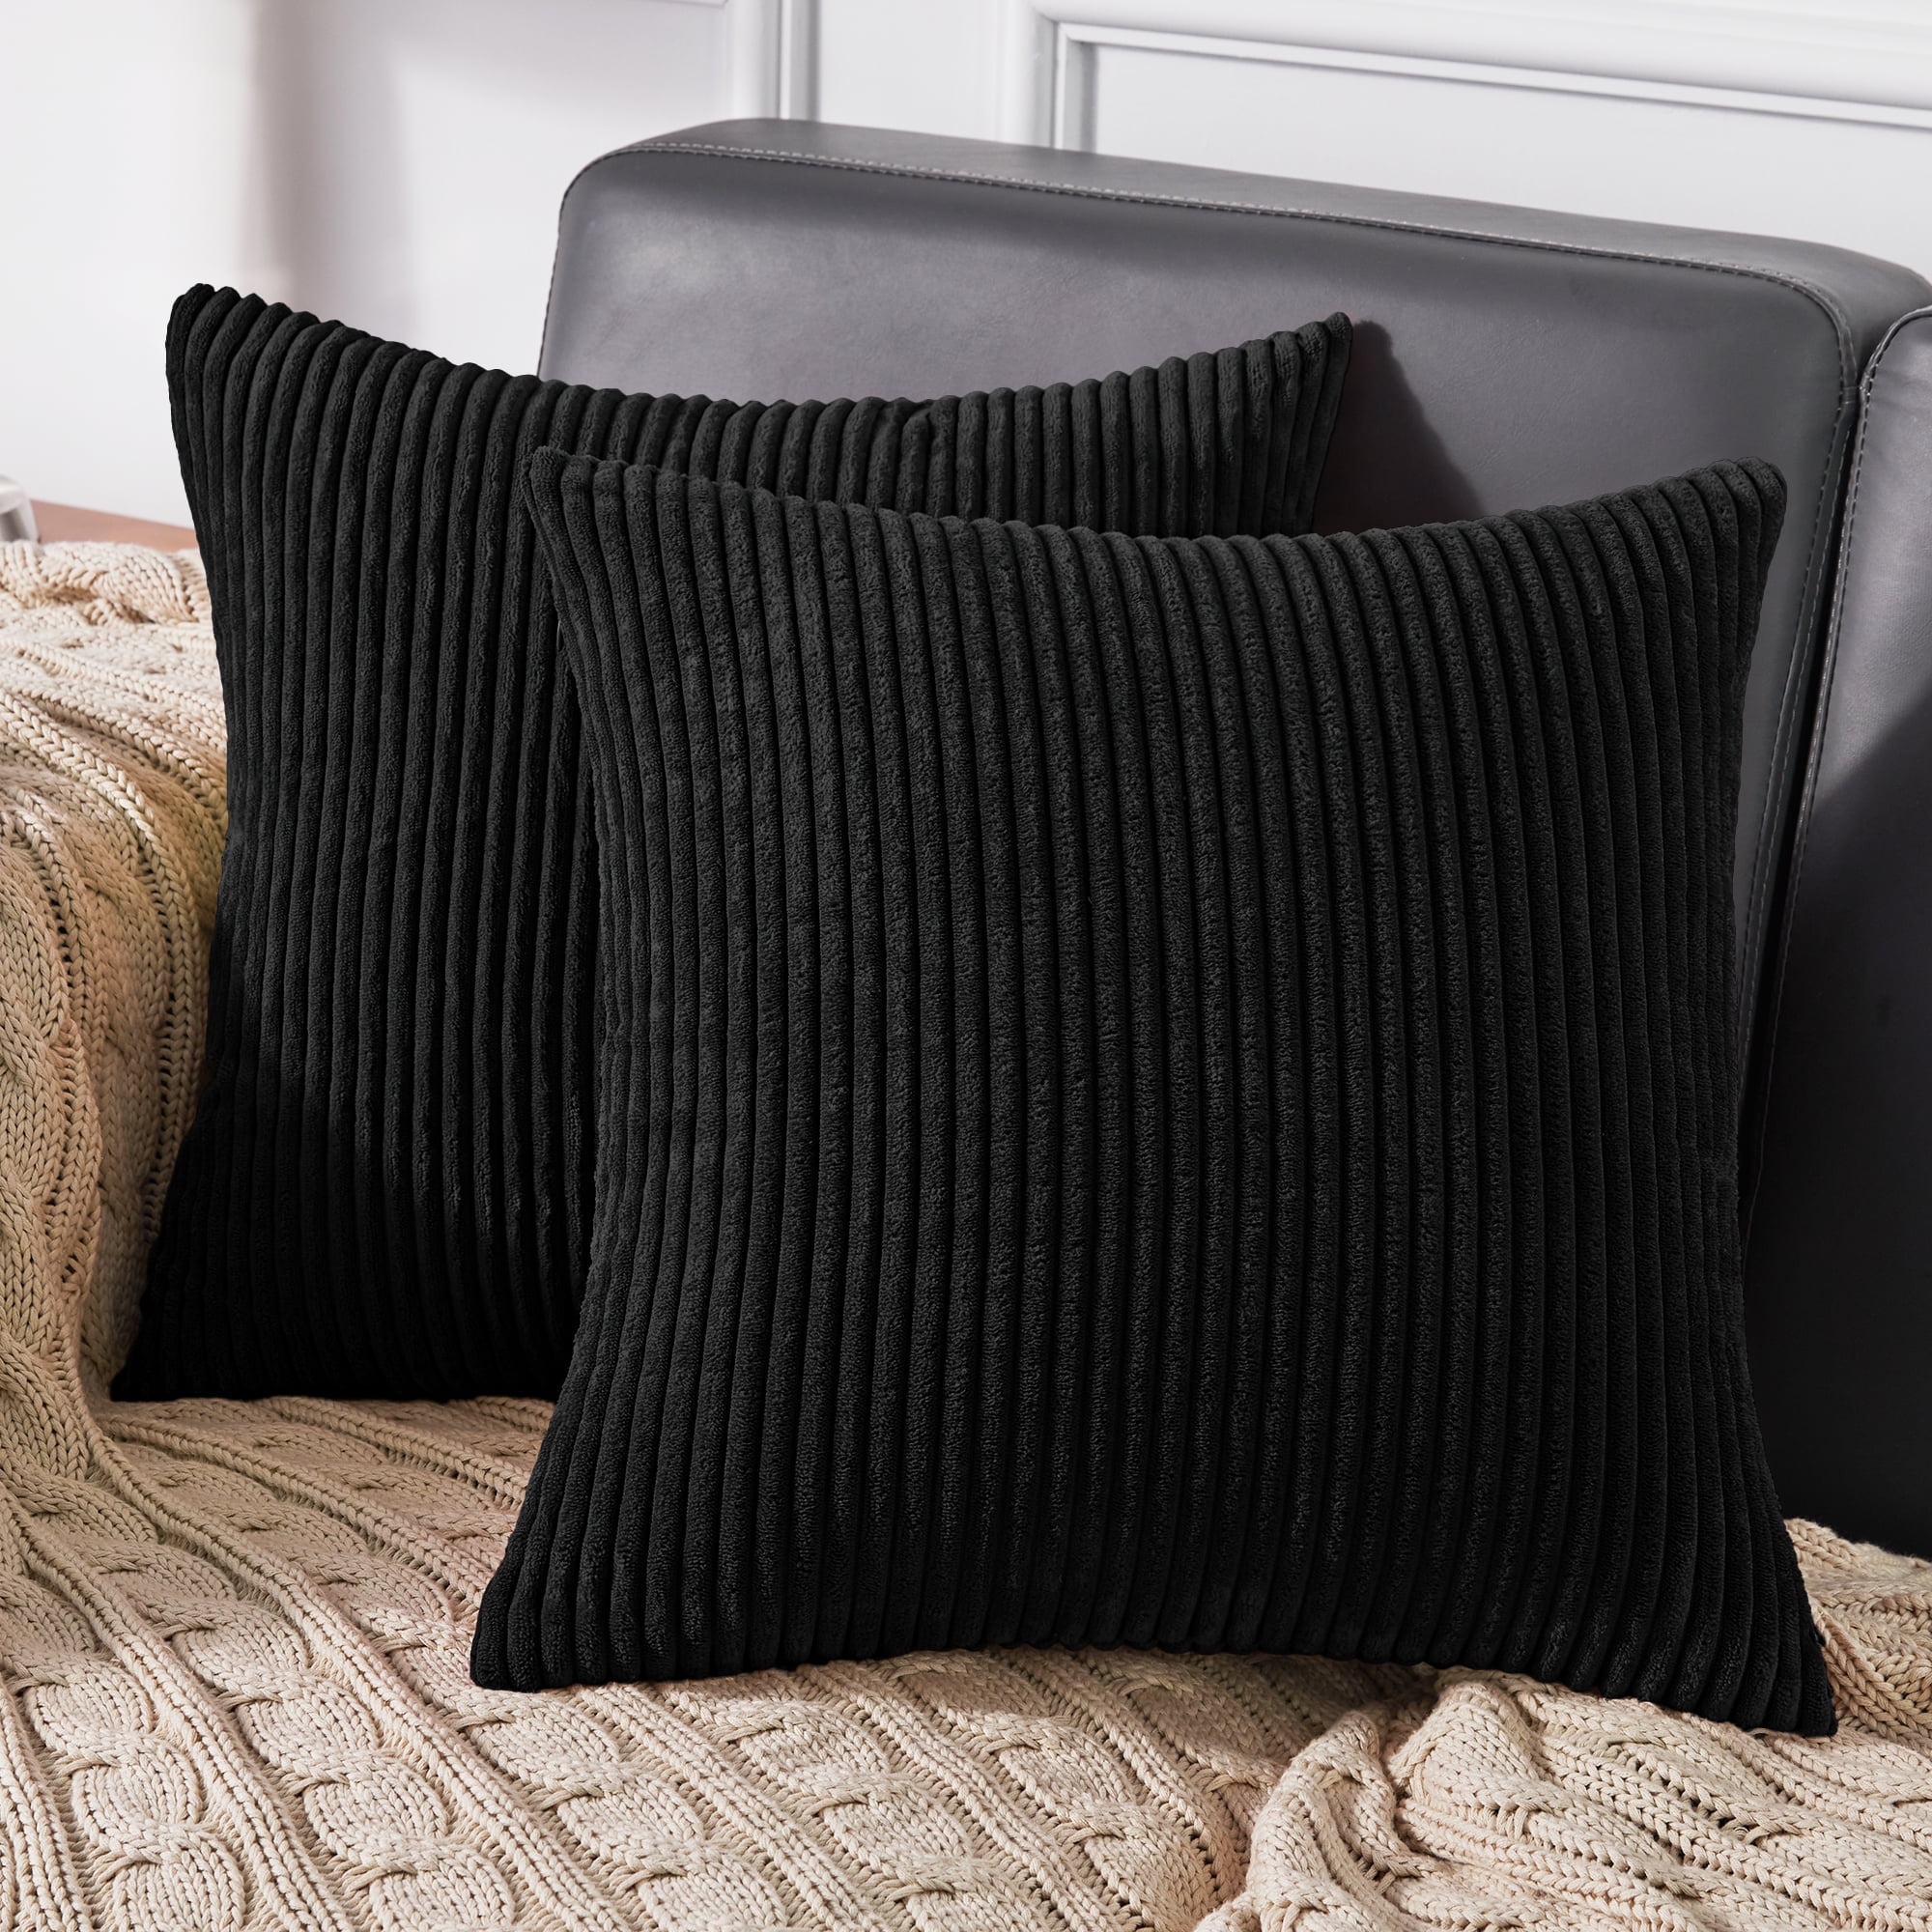 Throw Pillows for Couch Cushion Covers 18 x 18 inch Black